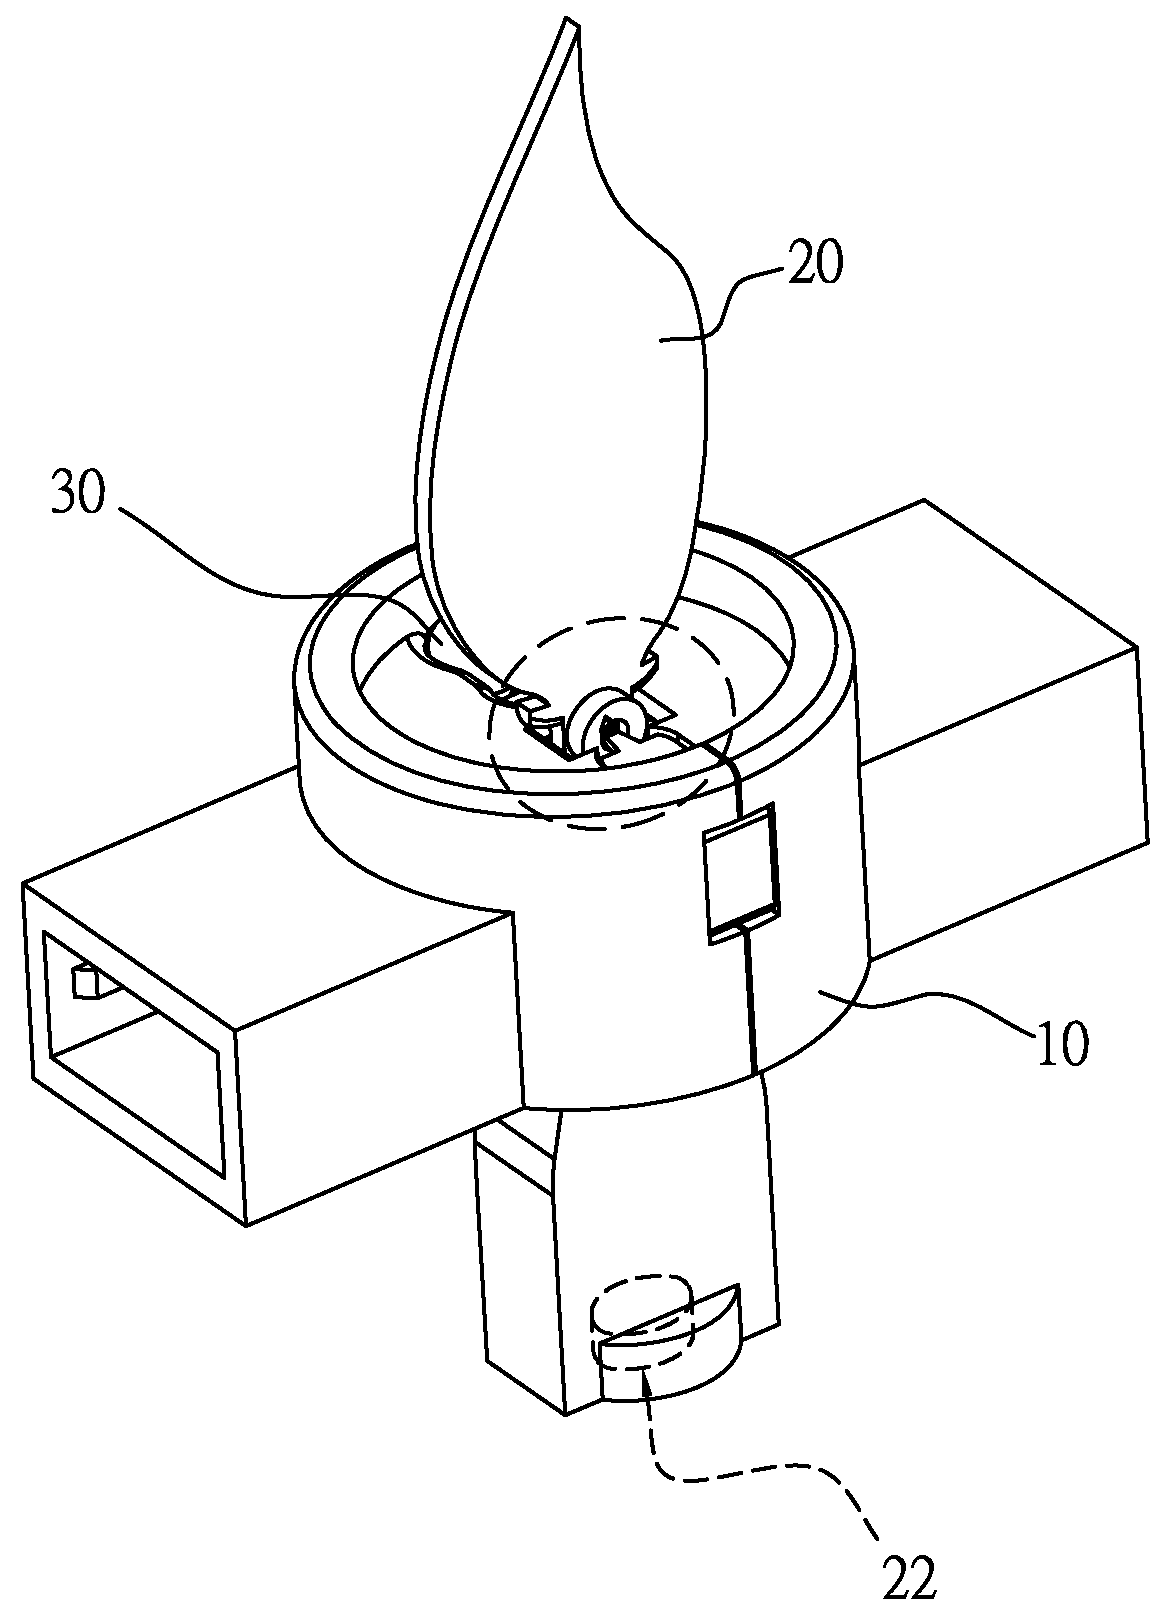 Dynamic flame simulating device